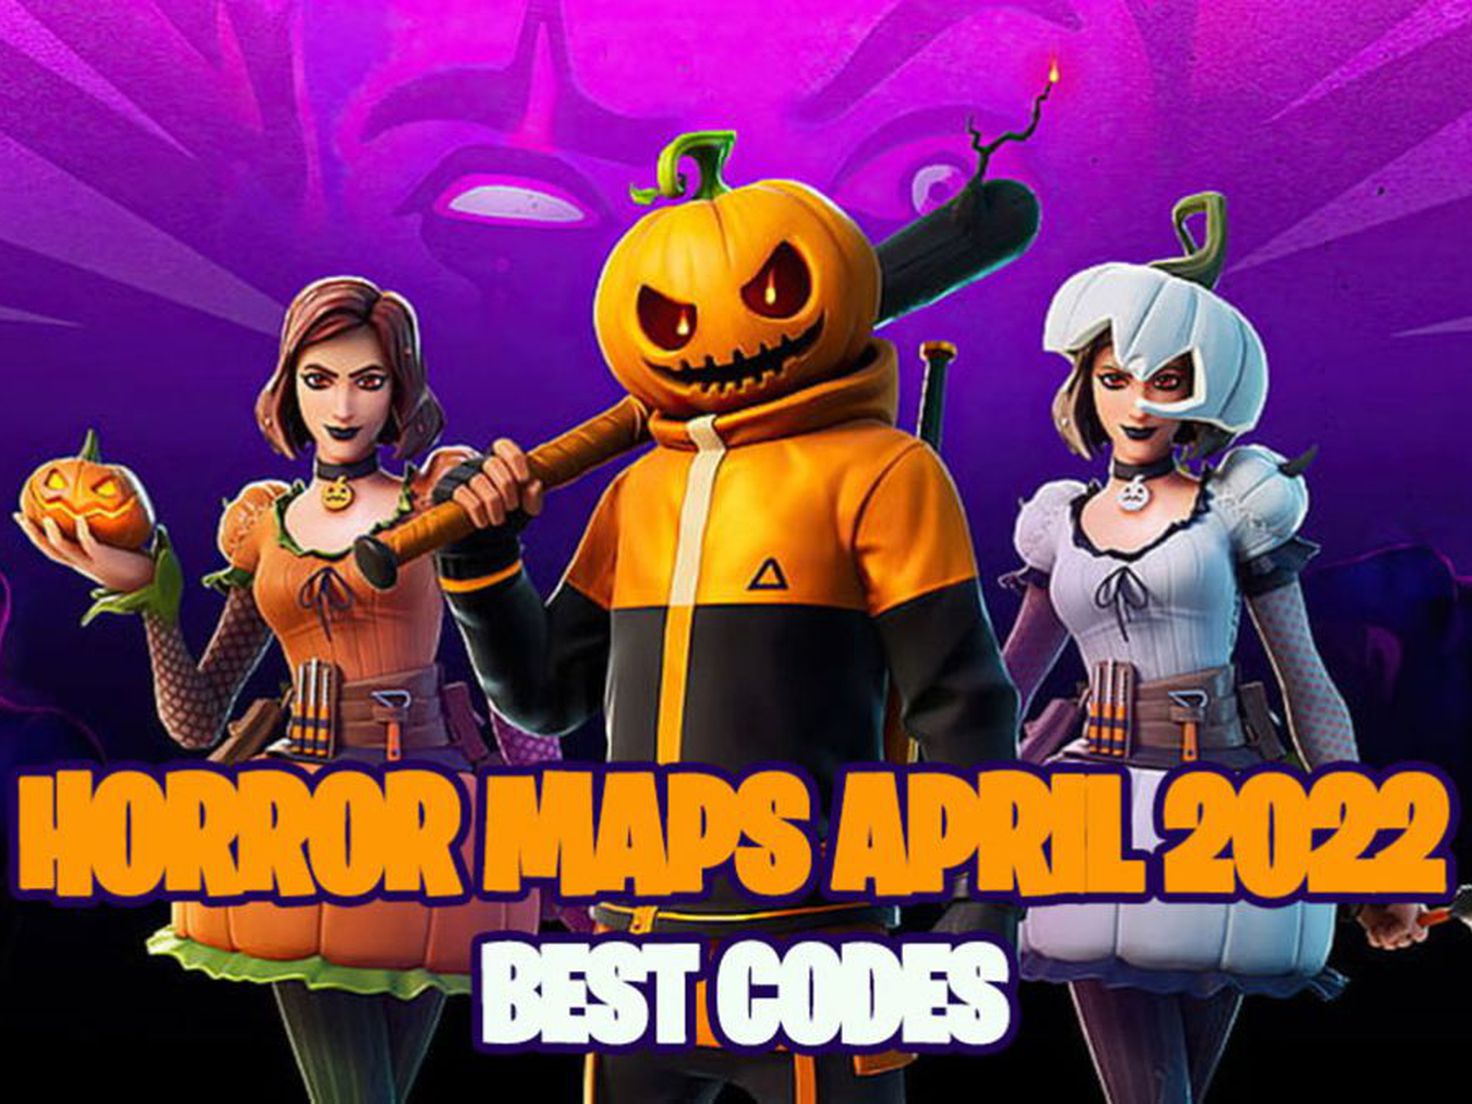 Five Nights At Freddy´s 4 / Multiplayer - Fortnite Creative and Map Code